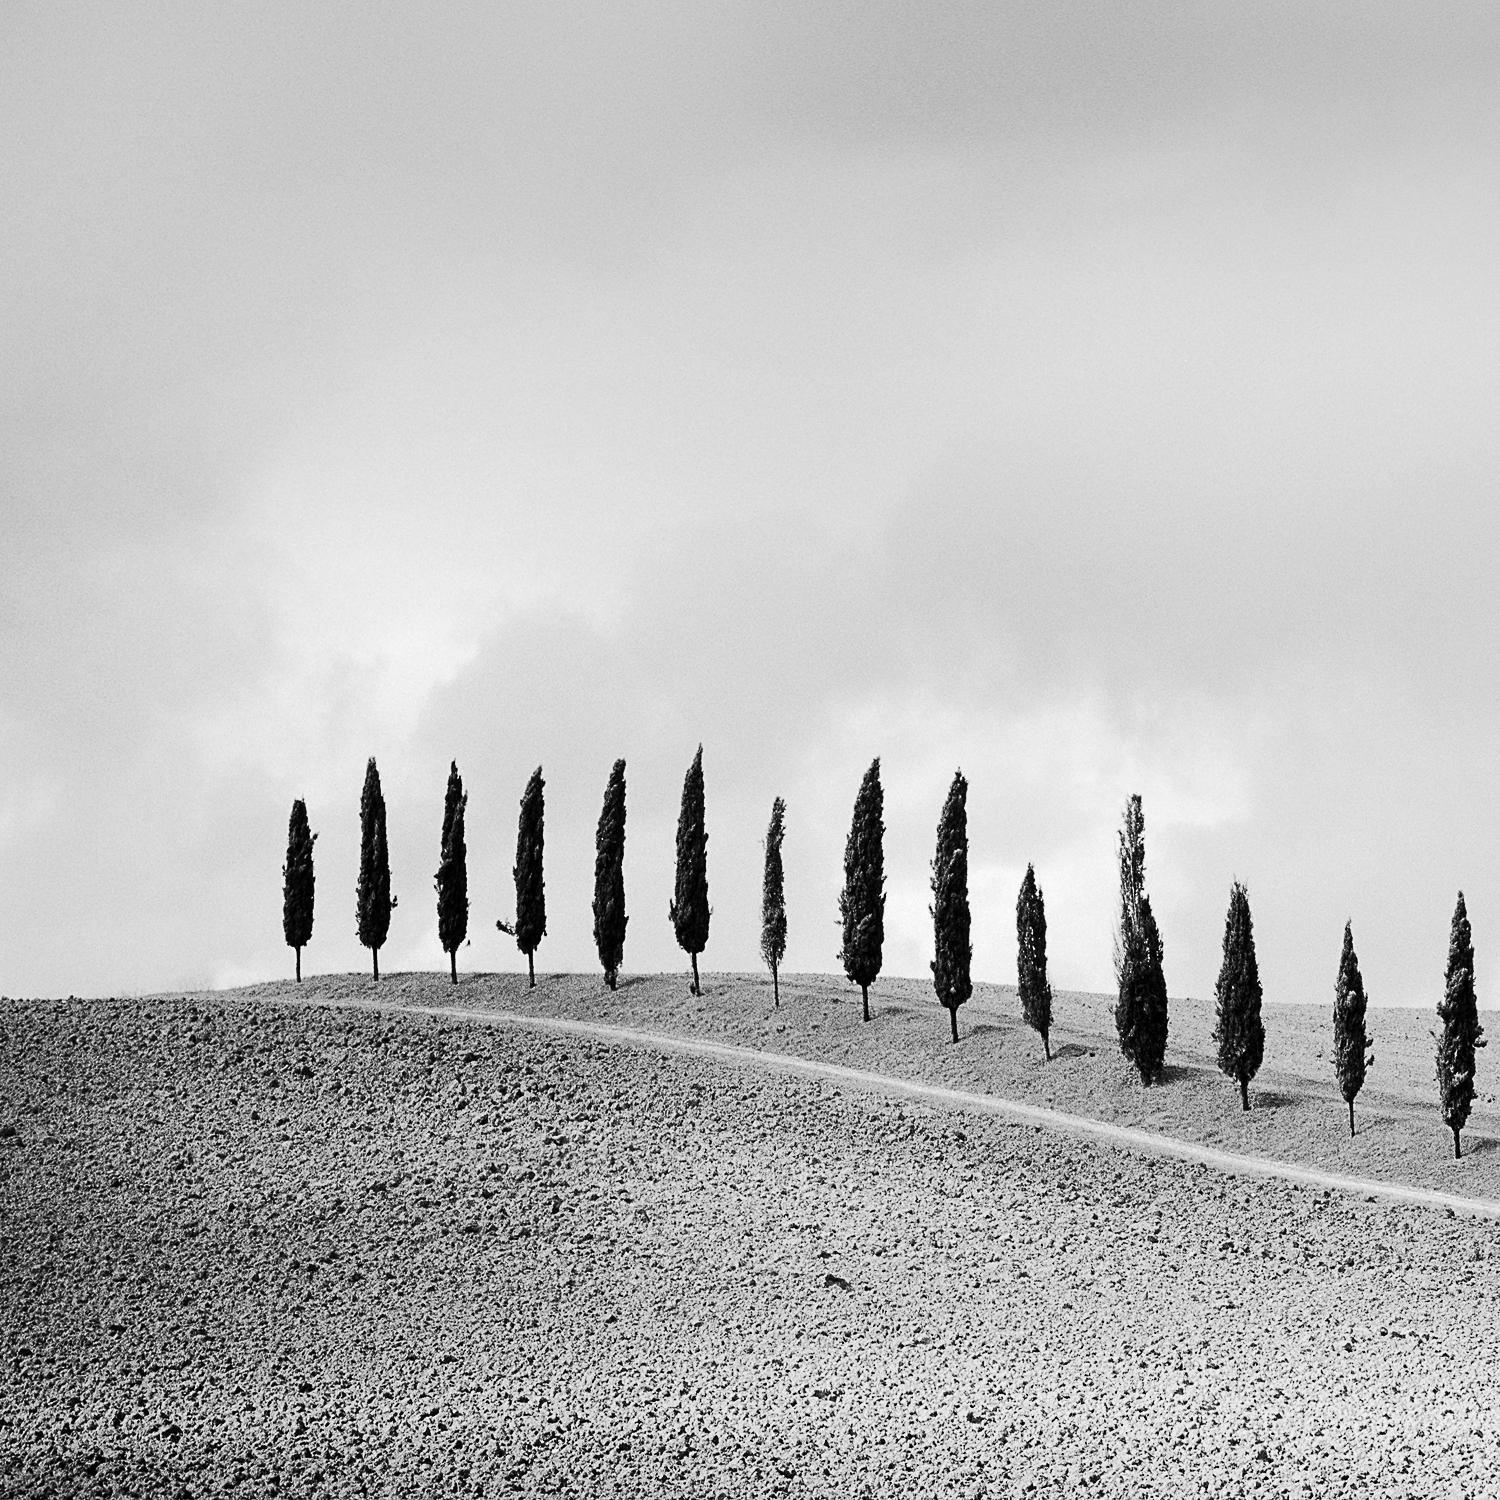  Row of Cypress Trees, Tuscany, Italy, b&w photography, fine art print, framed - Contemporary Photograph by Gerald Berghammer